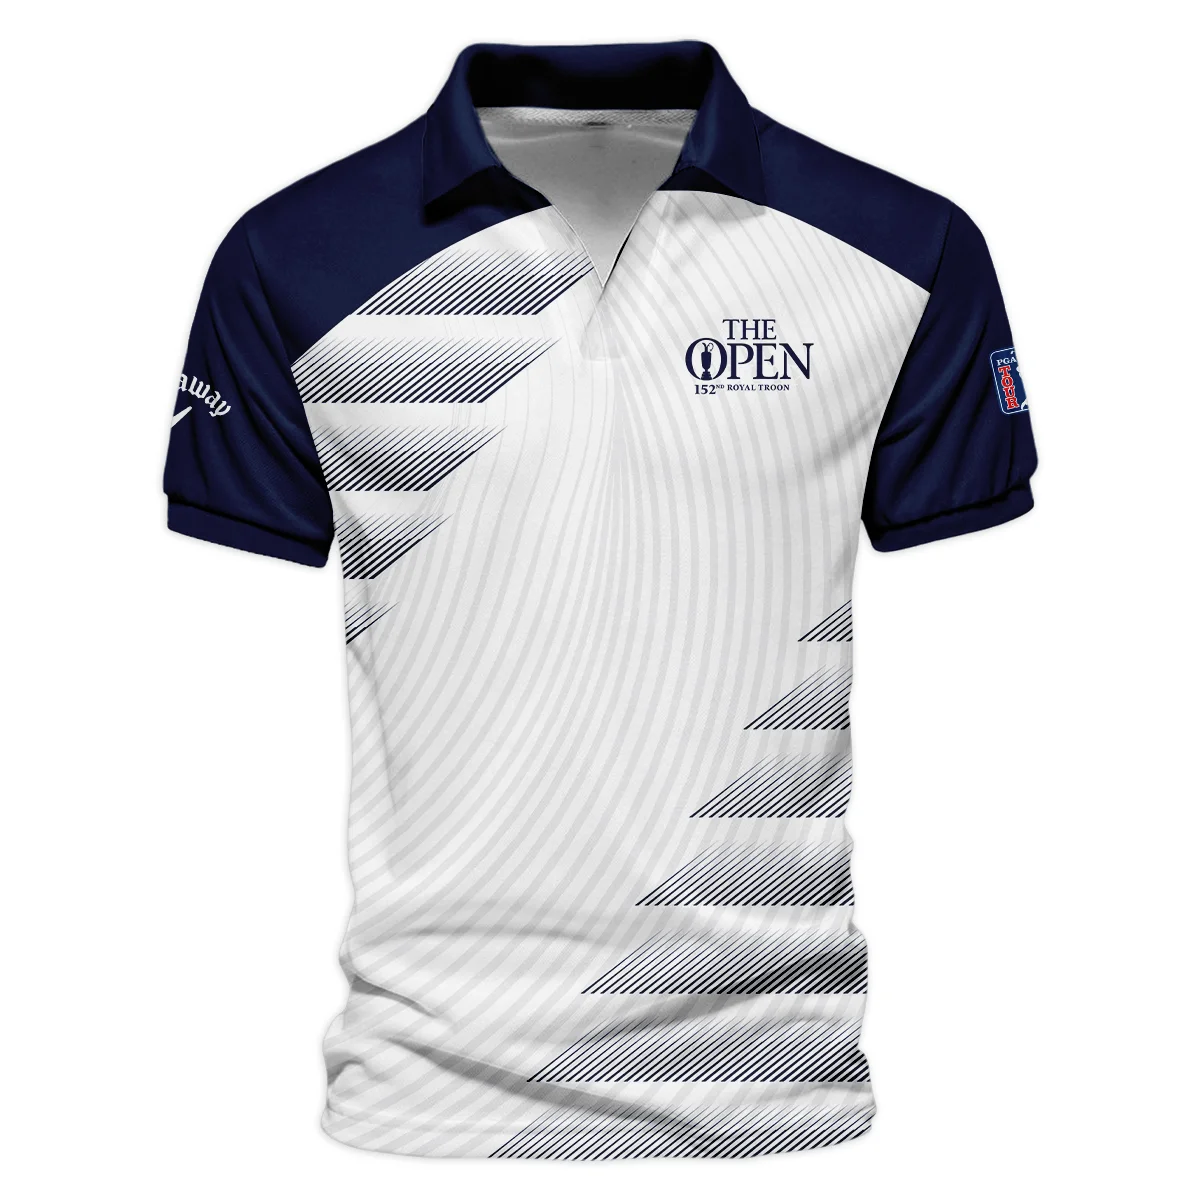 Callaway 152nd Open Championship Blue White Line Pattern Zipper Polo Shirt All Over Prints HOTOP280624A02CLWZPL